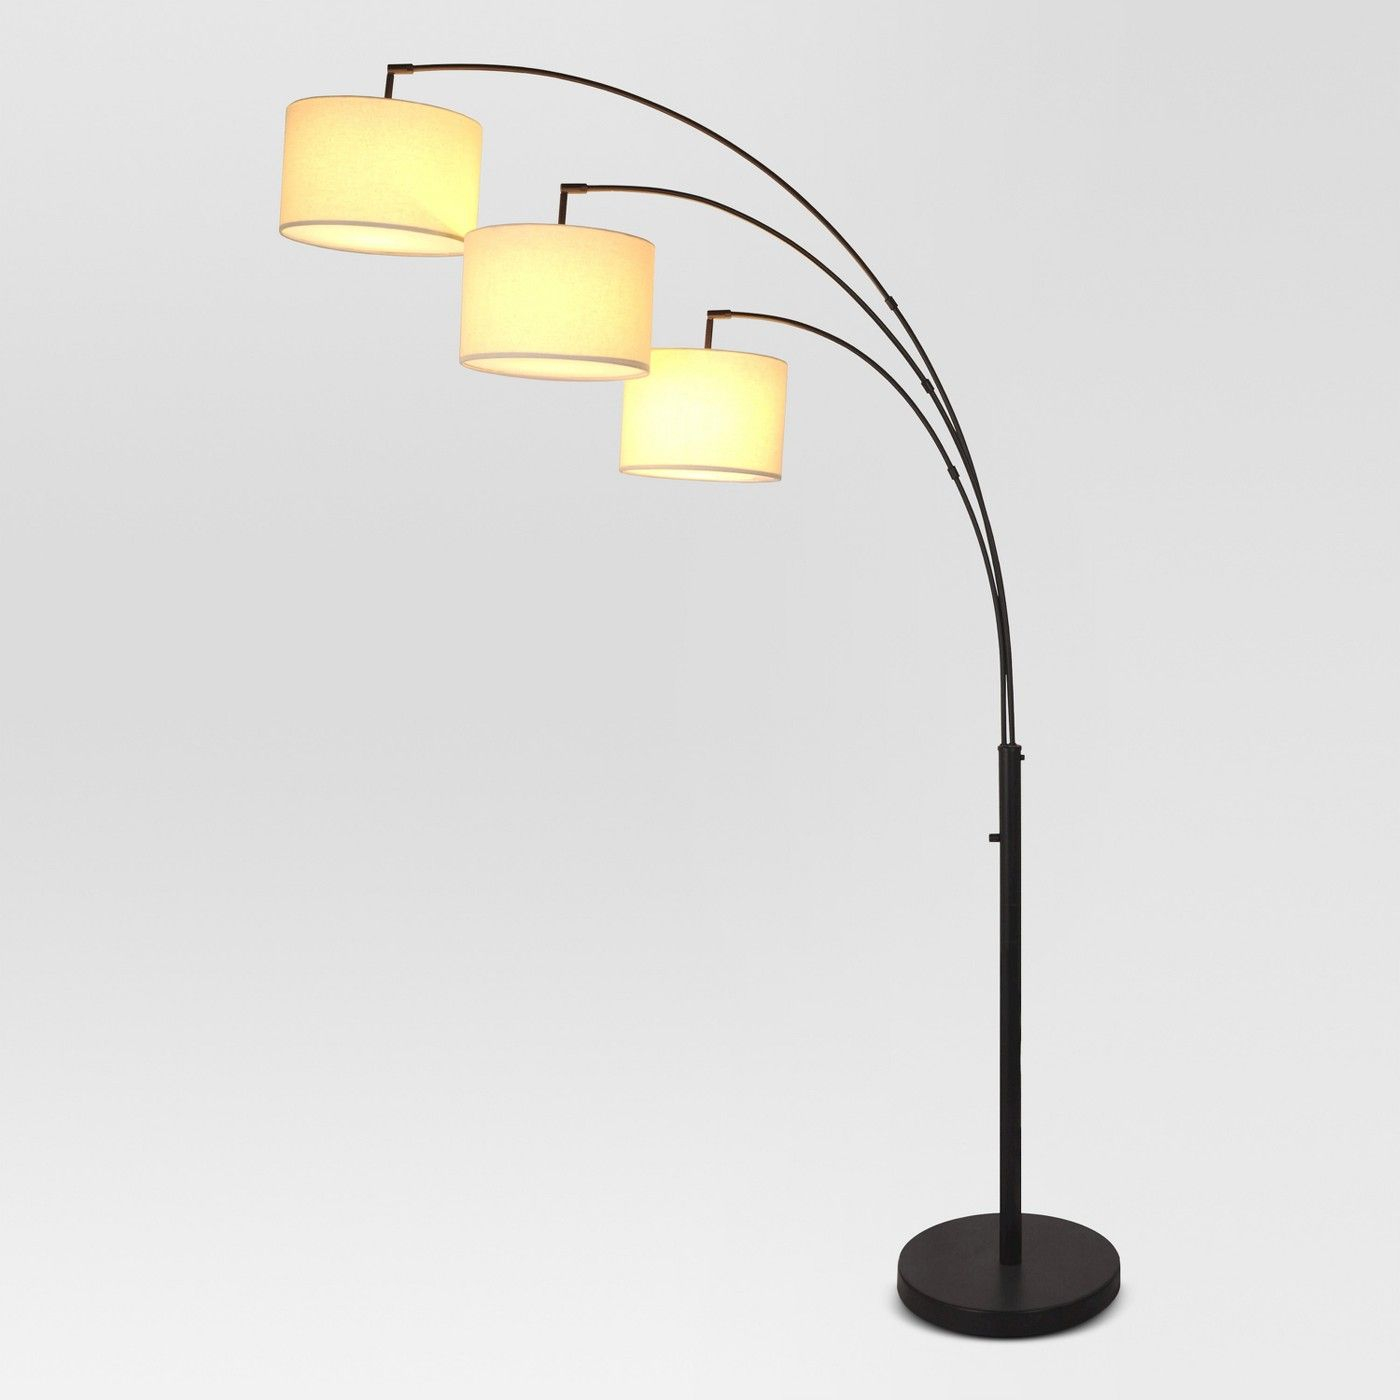 Avenal Shaded Arc Floor Lamp Brushed Nickel Lamp Only throughout size 1400 X 1400